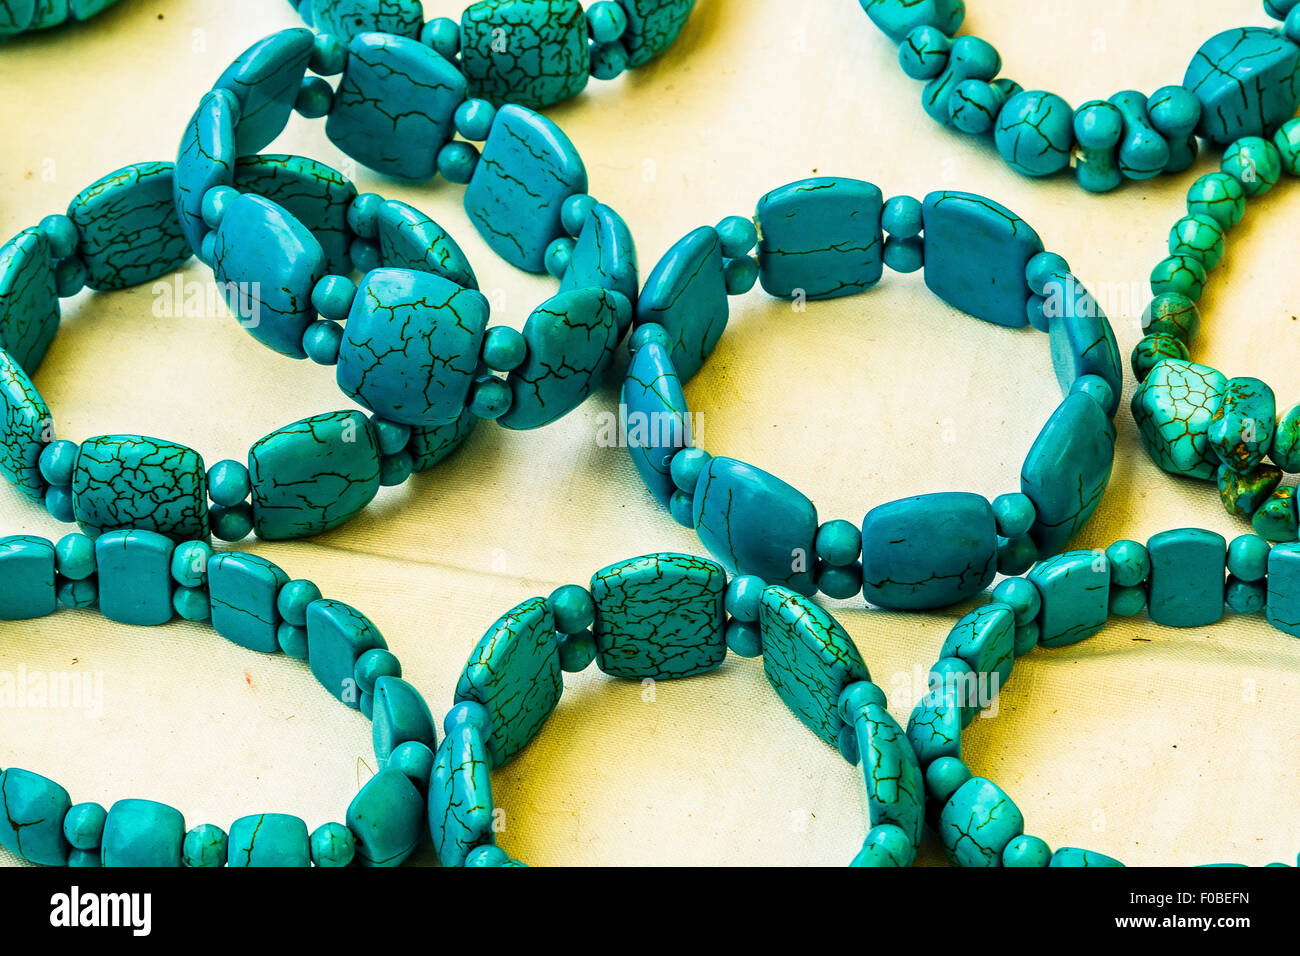 Blue stone beads in bracelets on sale at a market stall Stock Photo